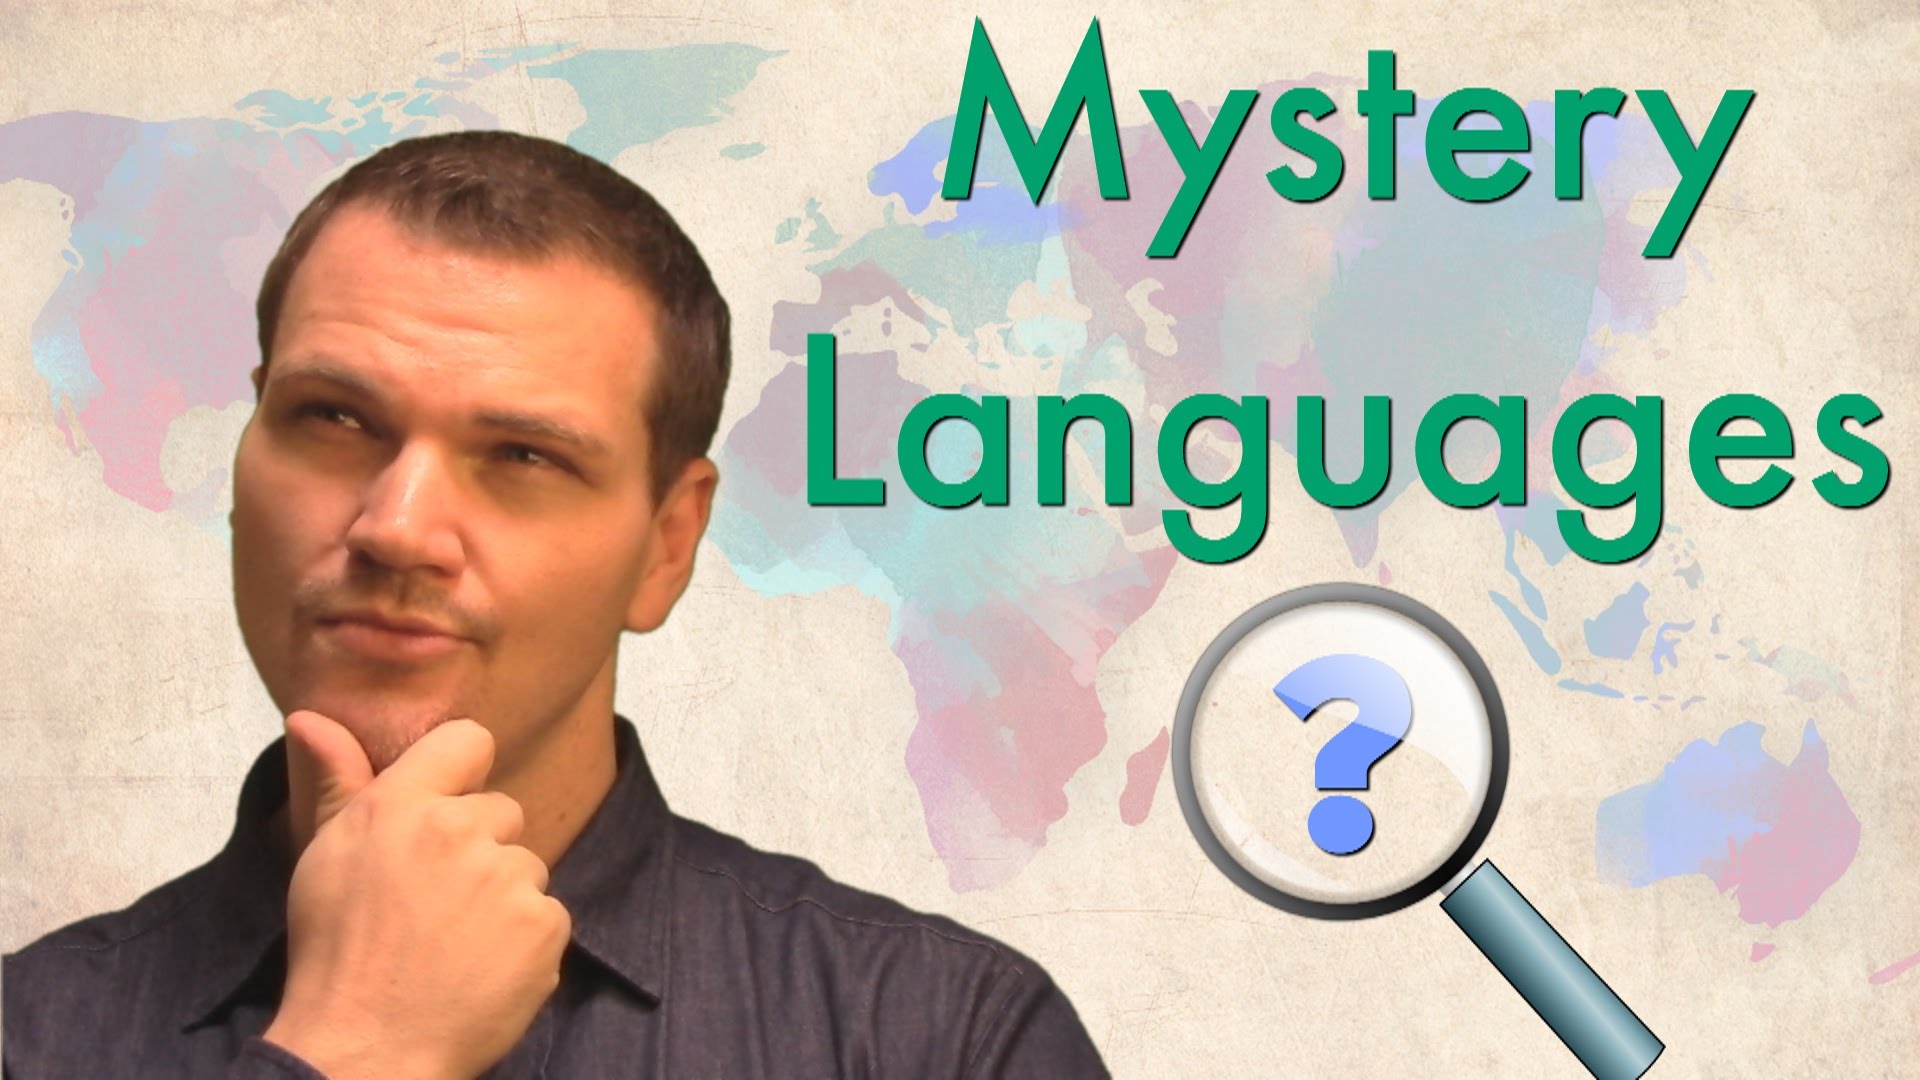 Mystery Languages – Can You Guess What They Are?